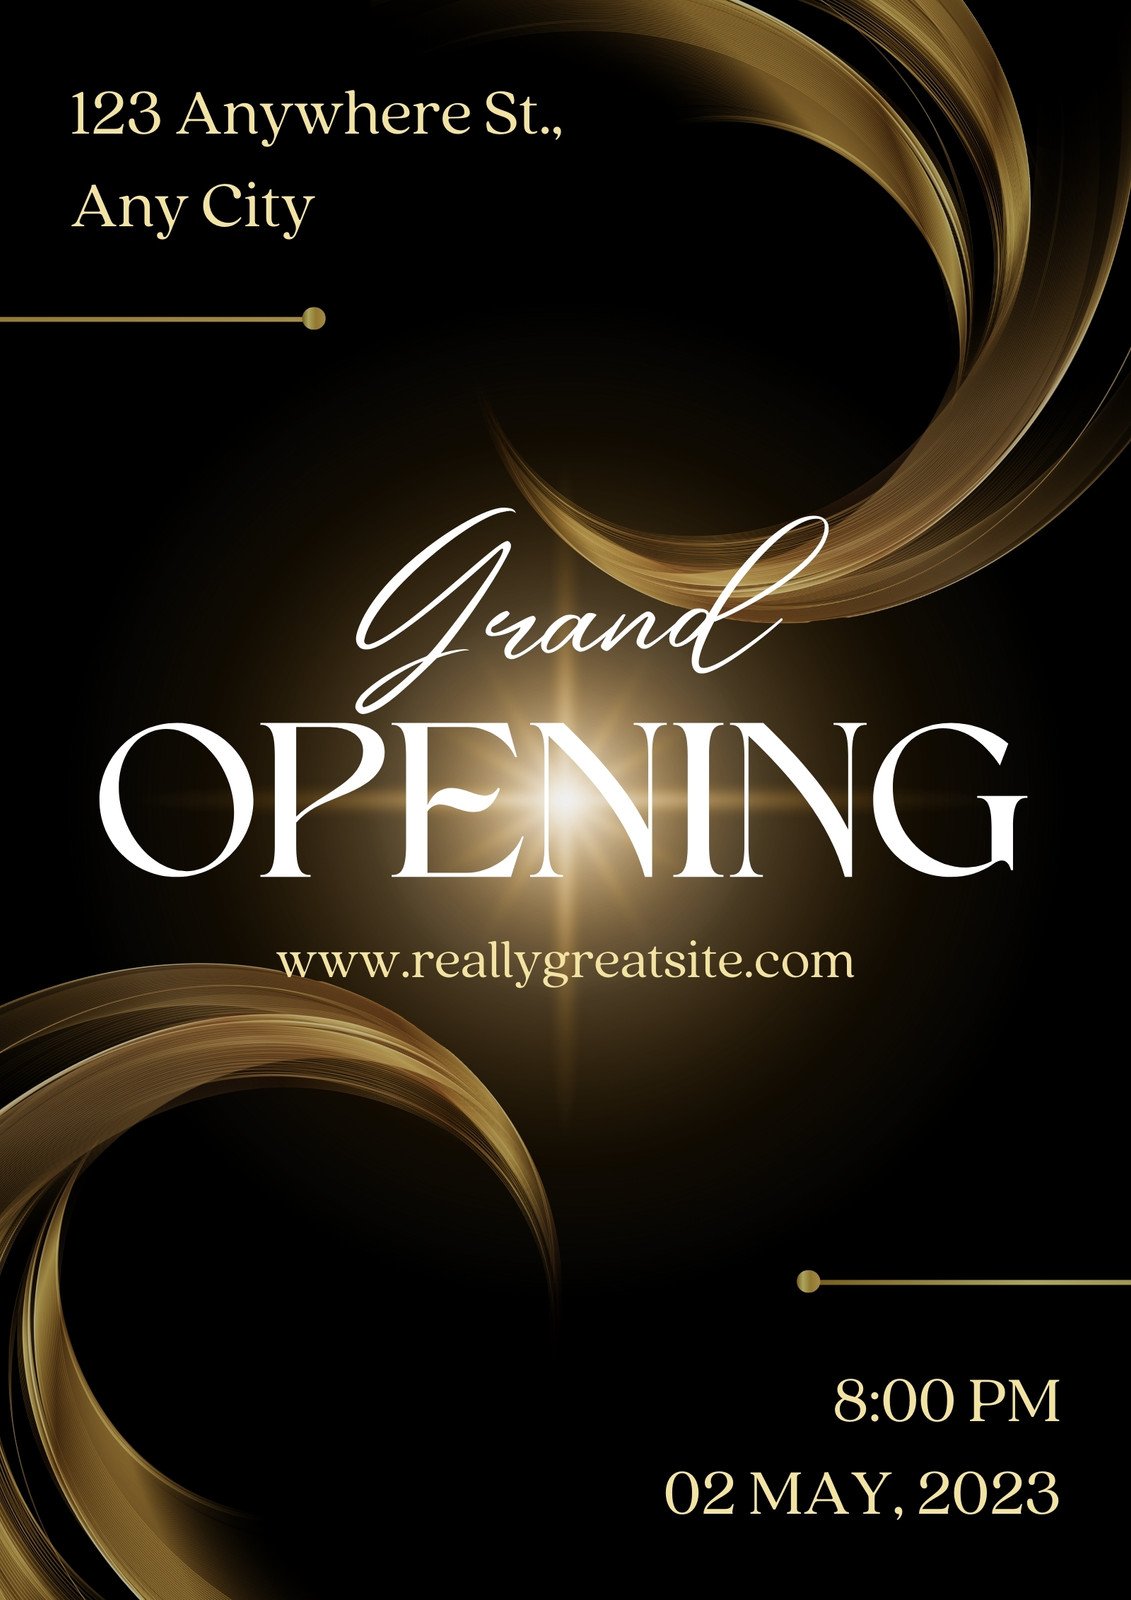 Grand Opening - Poster 29 In. X 42 In. 